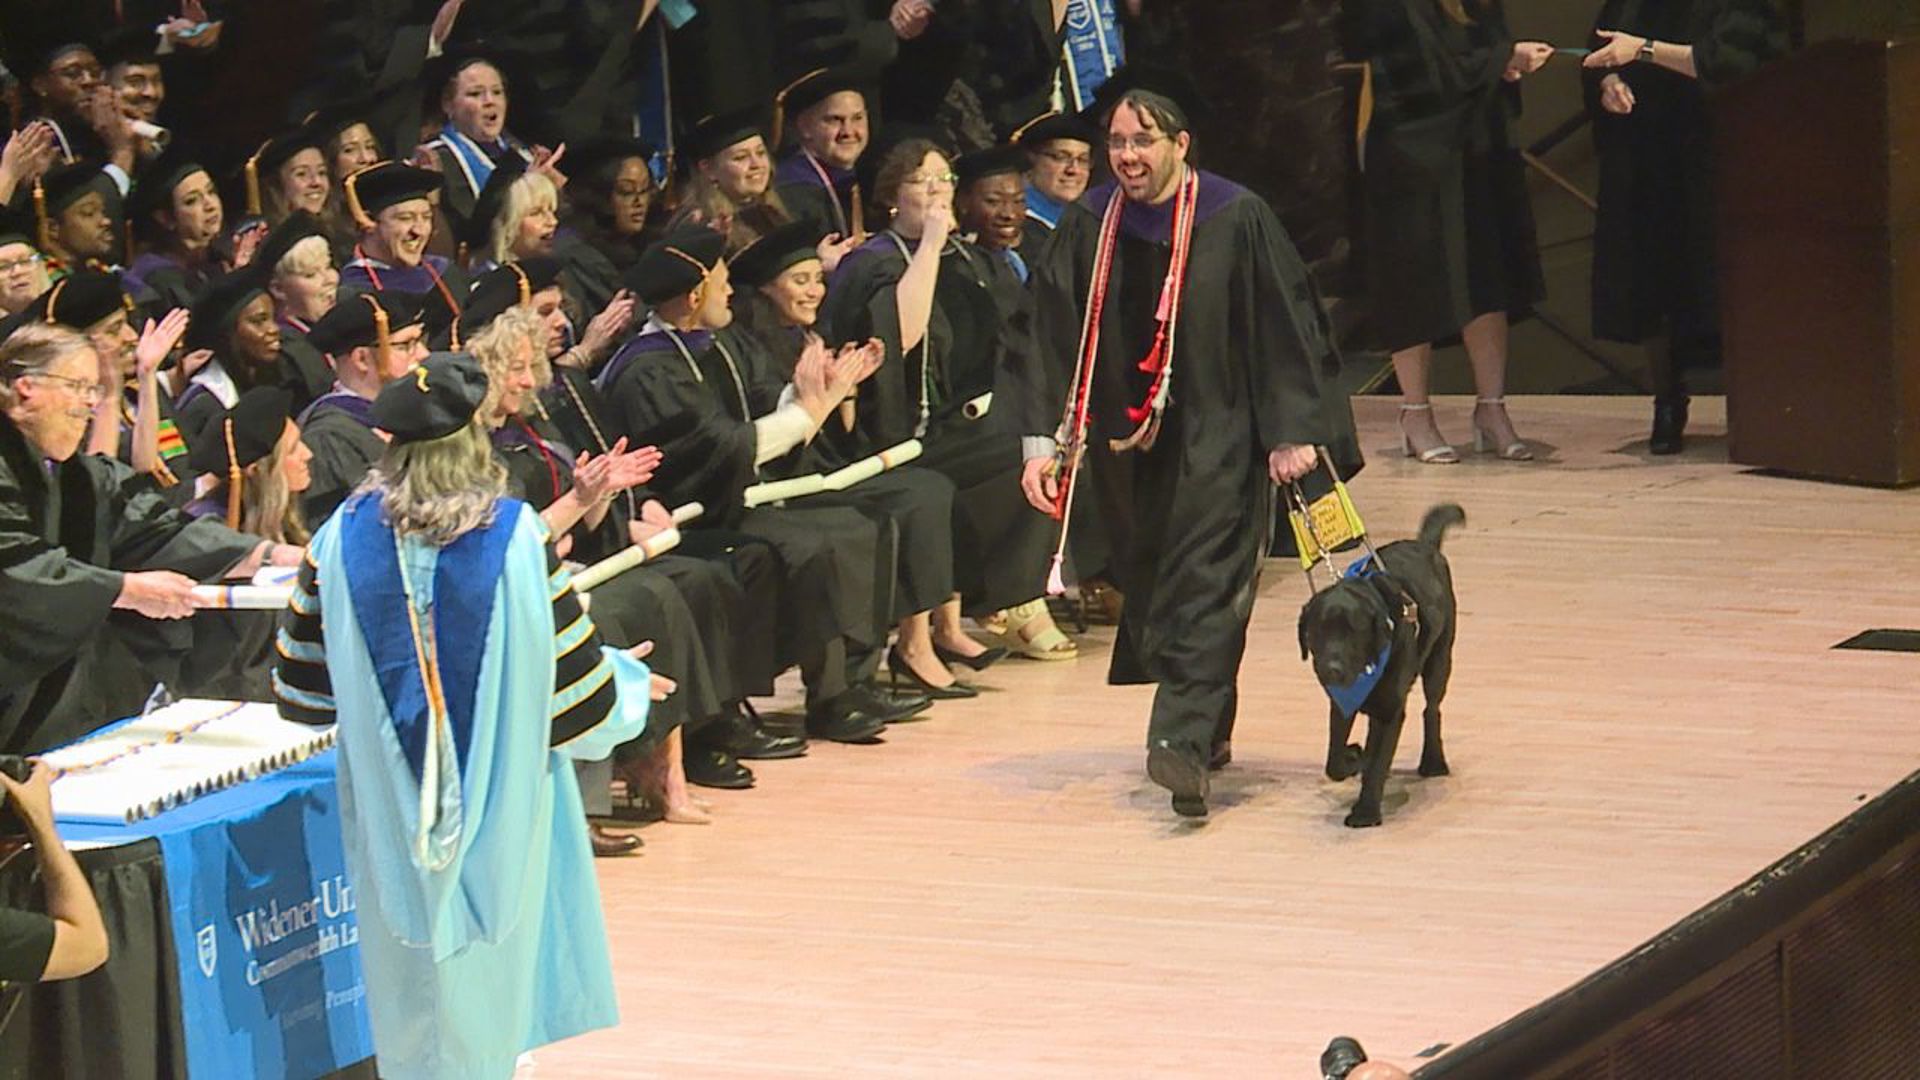 Zachary Penzone, who has retinitis pigmentosa, was joined on stage by his seeing-eye dog on graduation day.